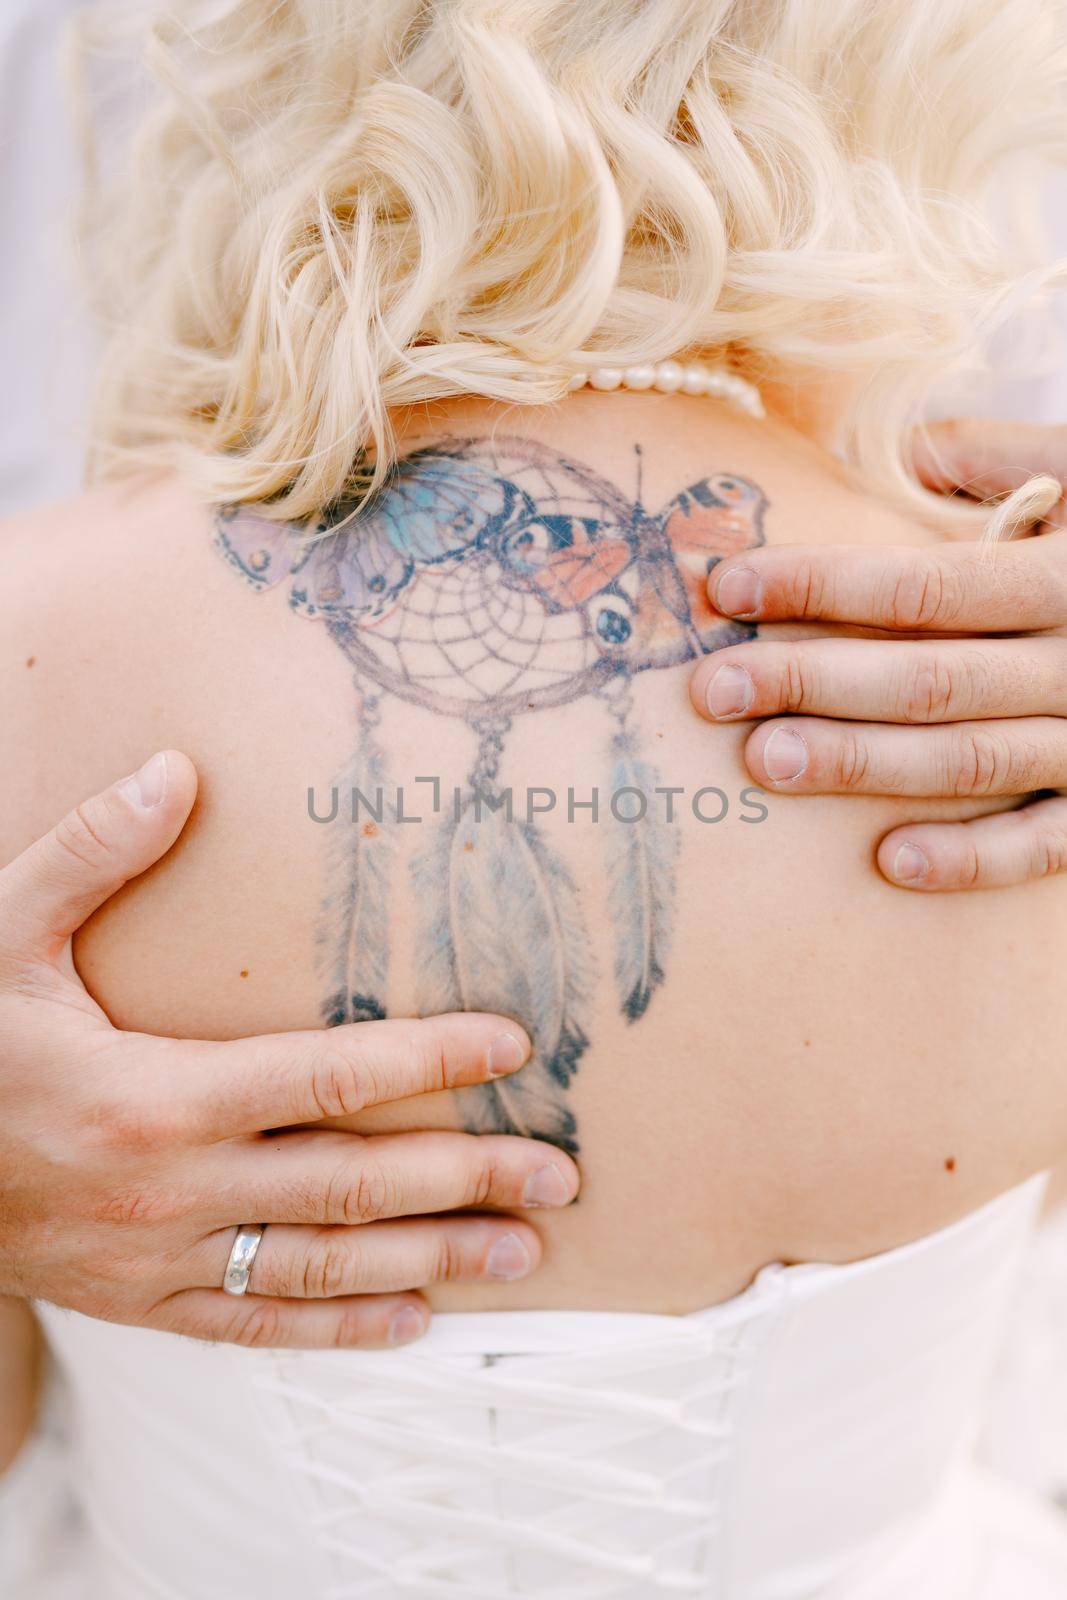 Bride with dreamcatcher tattoo on her back, groom hugs the bride and puts his hands on her back, close-up by Nadtochiy